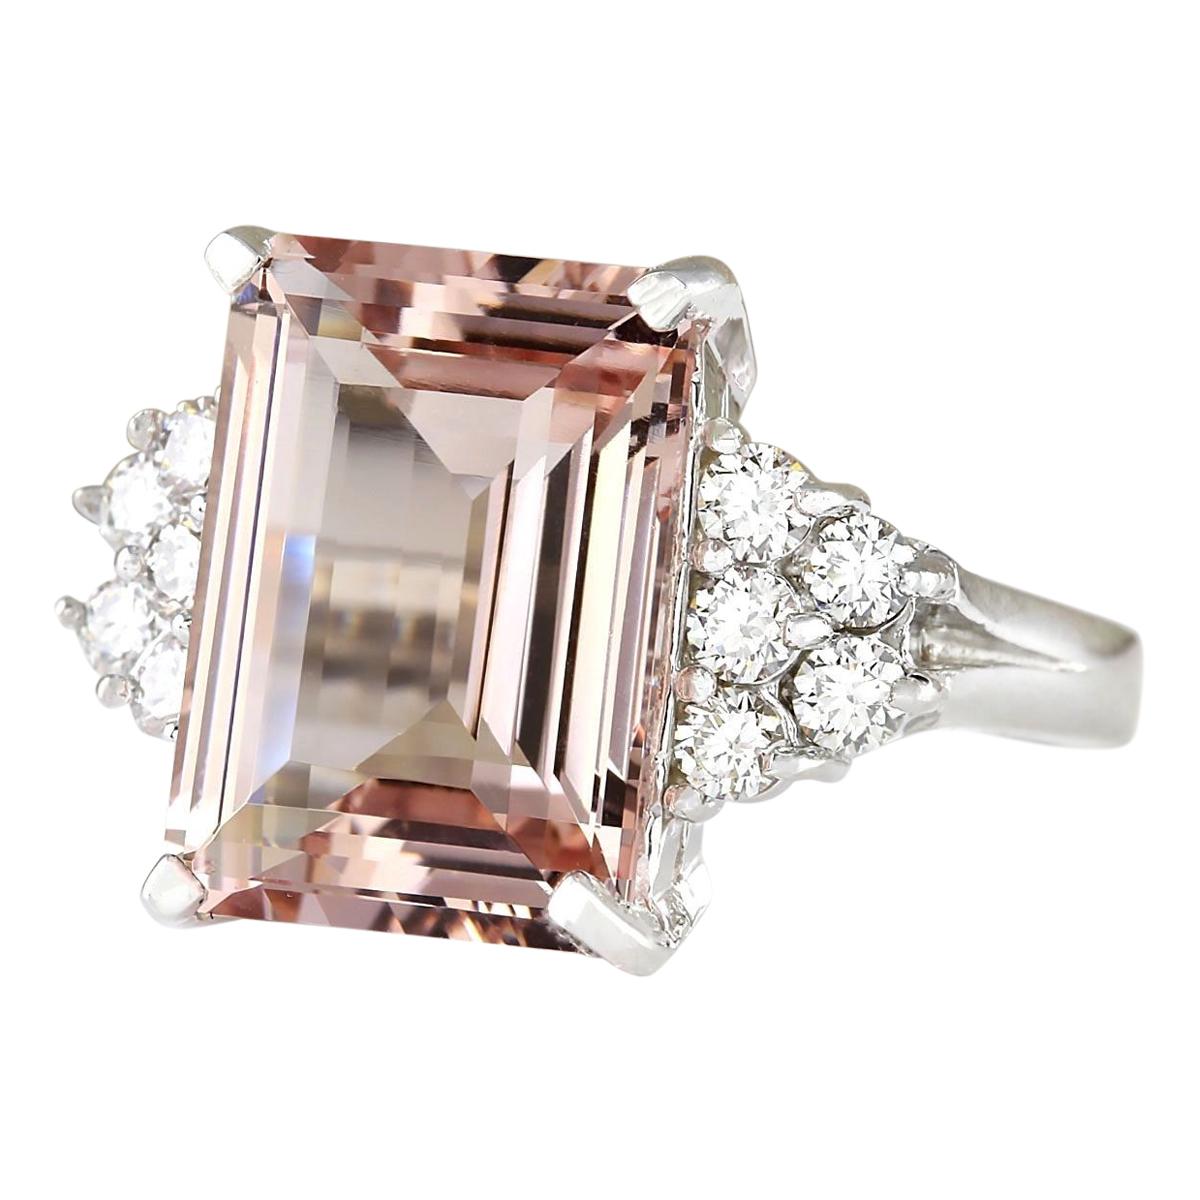 Introducing our exquisite 7.25 Carat Natural Morganite 14 Karat White Gold Diamond Ring, a true symbol of elegance and sophistication.
Crafted from luxurious 14K white gold, this stunning ring boasts a mesmerizing oval-shaped morganite stone